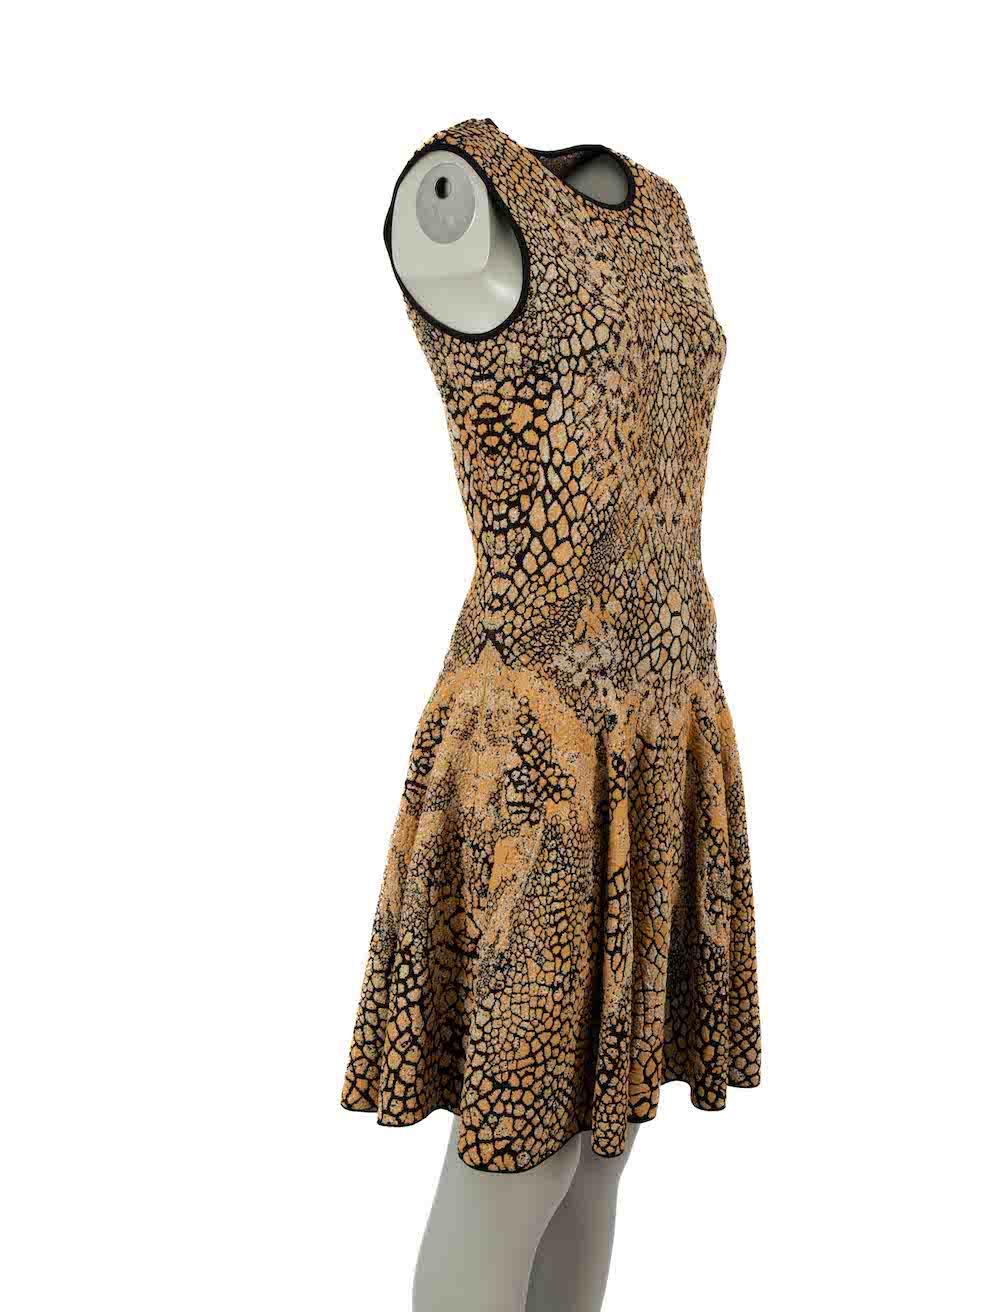 CONDITION is Very good. Minimal wear to dress is evident. Minimal wear to the front with small pulls to the weave on this used Alexander McQueen designer resale item.
 
 Details
 Brown
 Viscose
 Knit dress
 Sleeveless
 Round neck
 Leopard print
